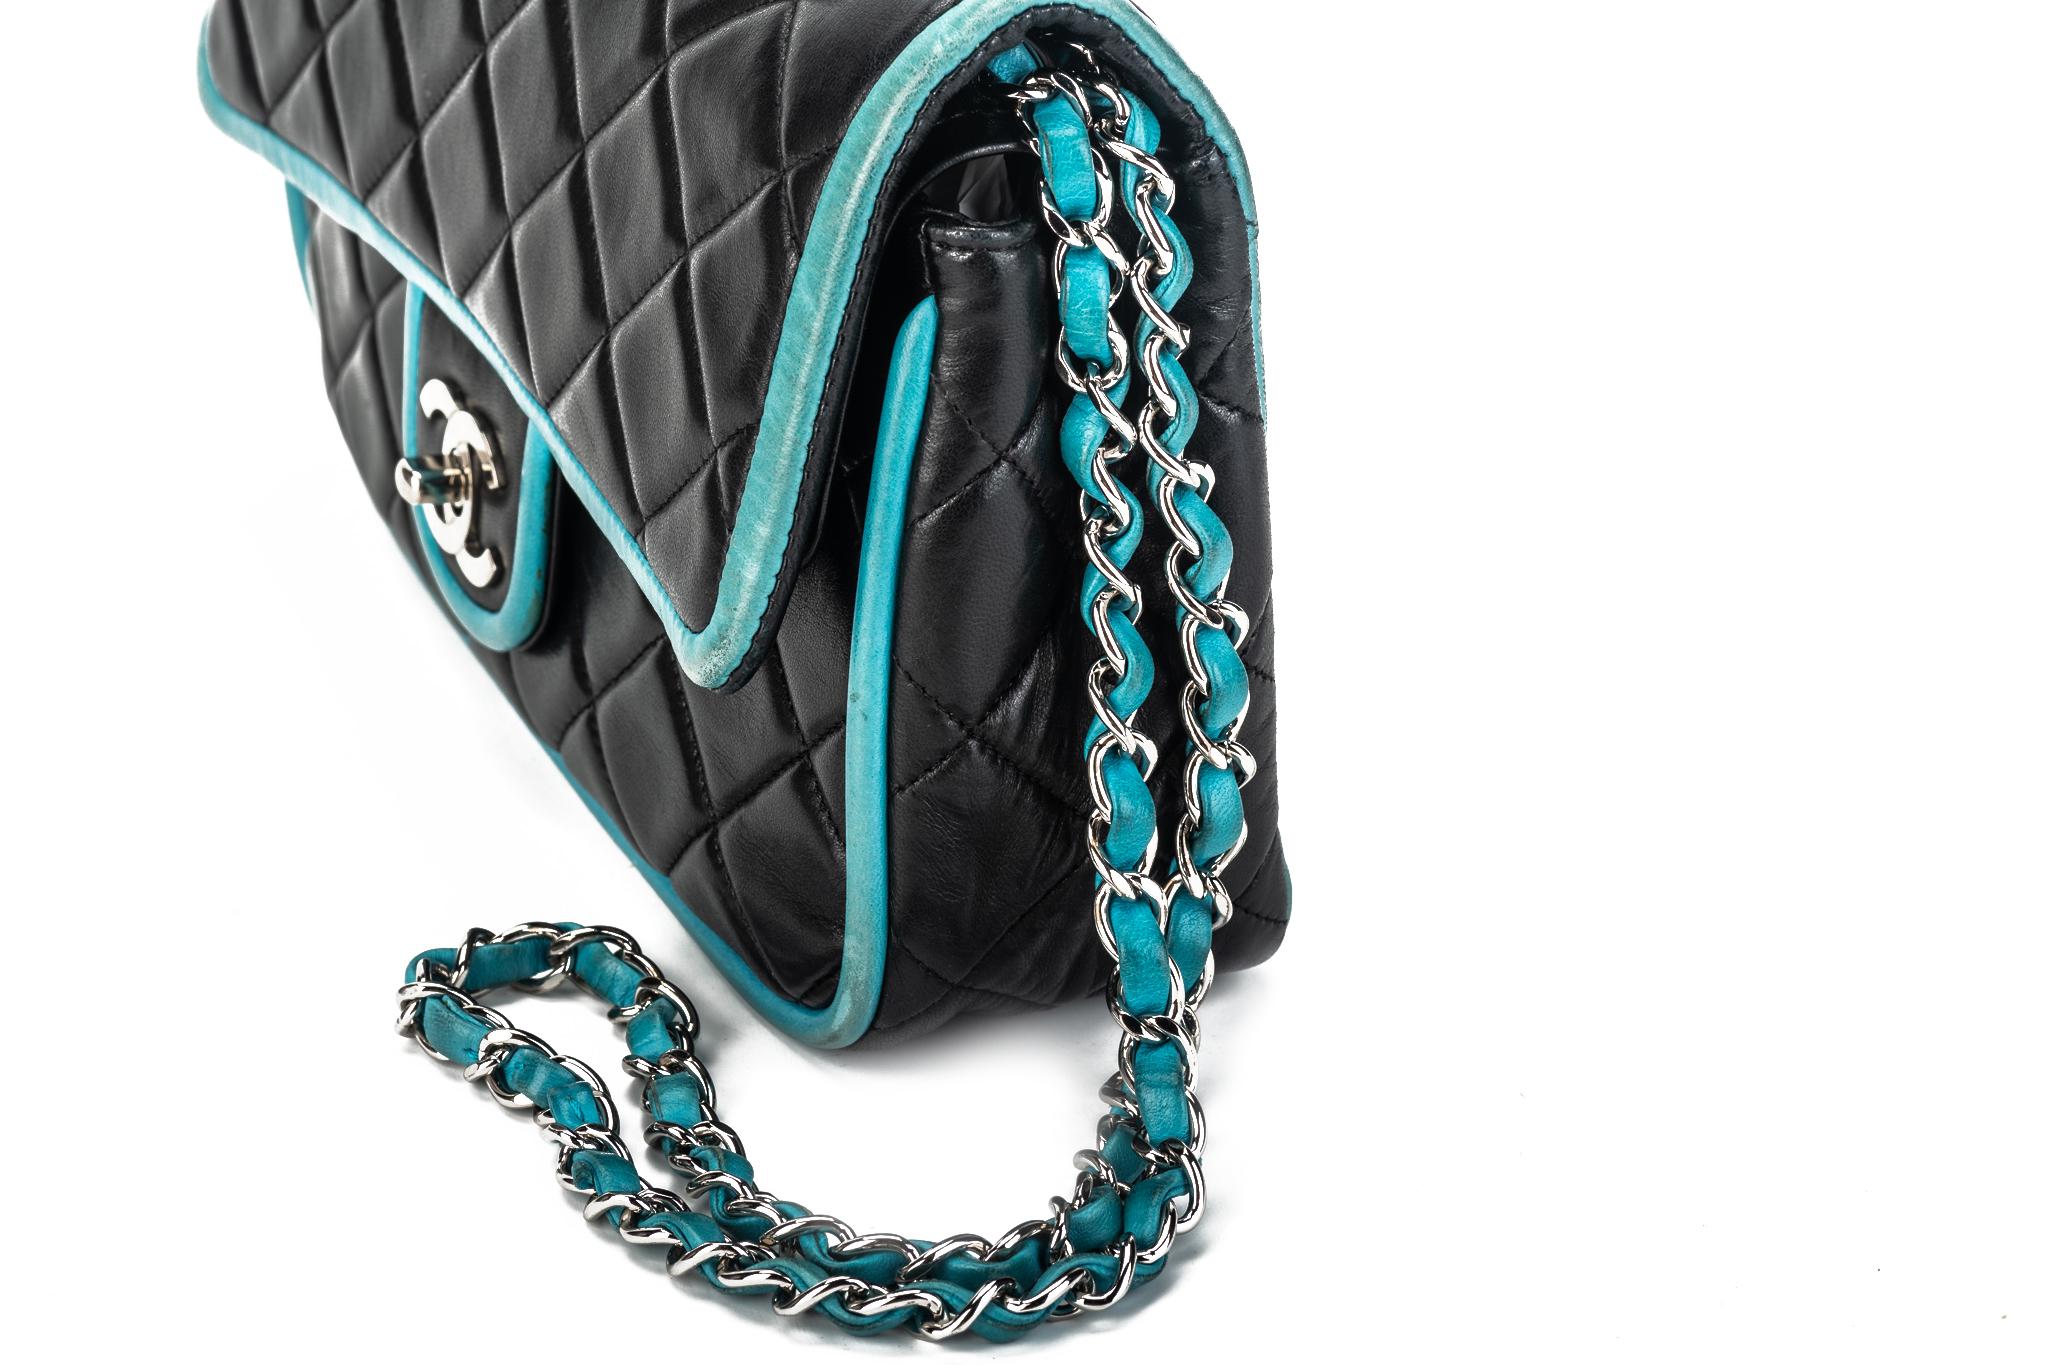 Chanel Black Turquoise Double Flap Bag For Sale 4